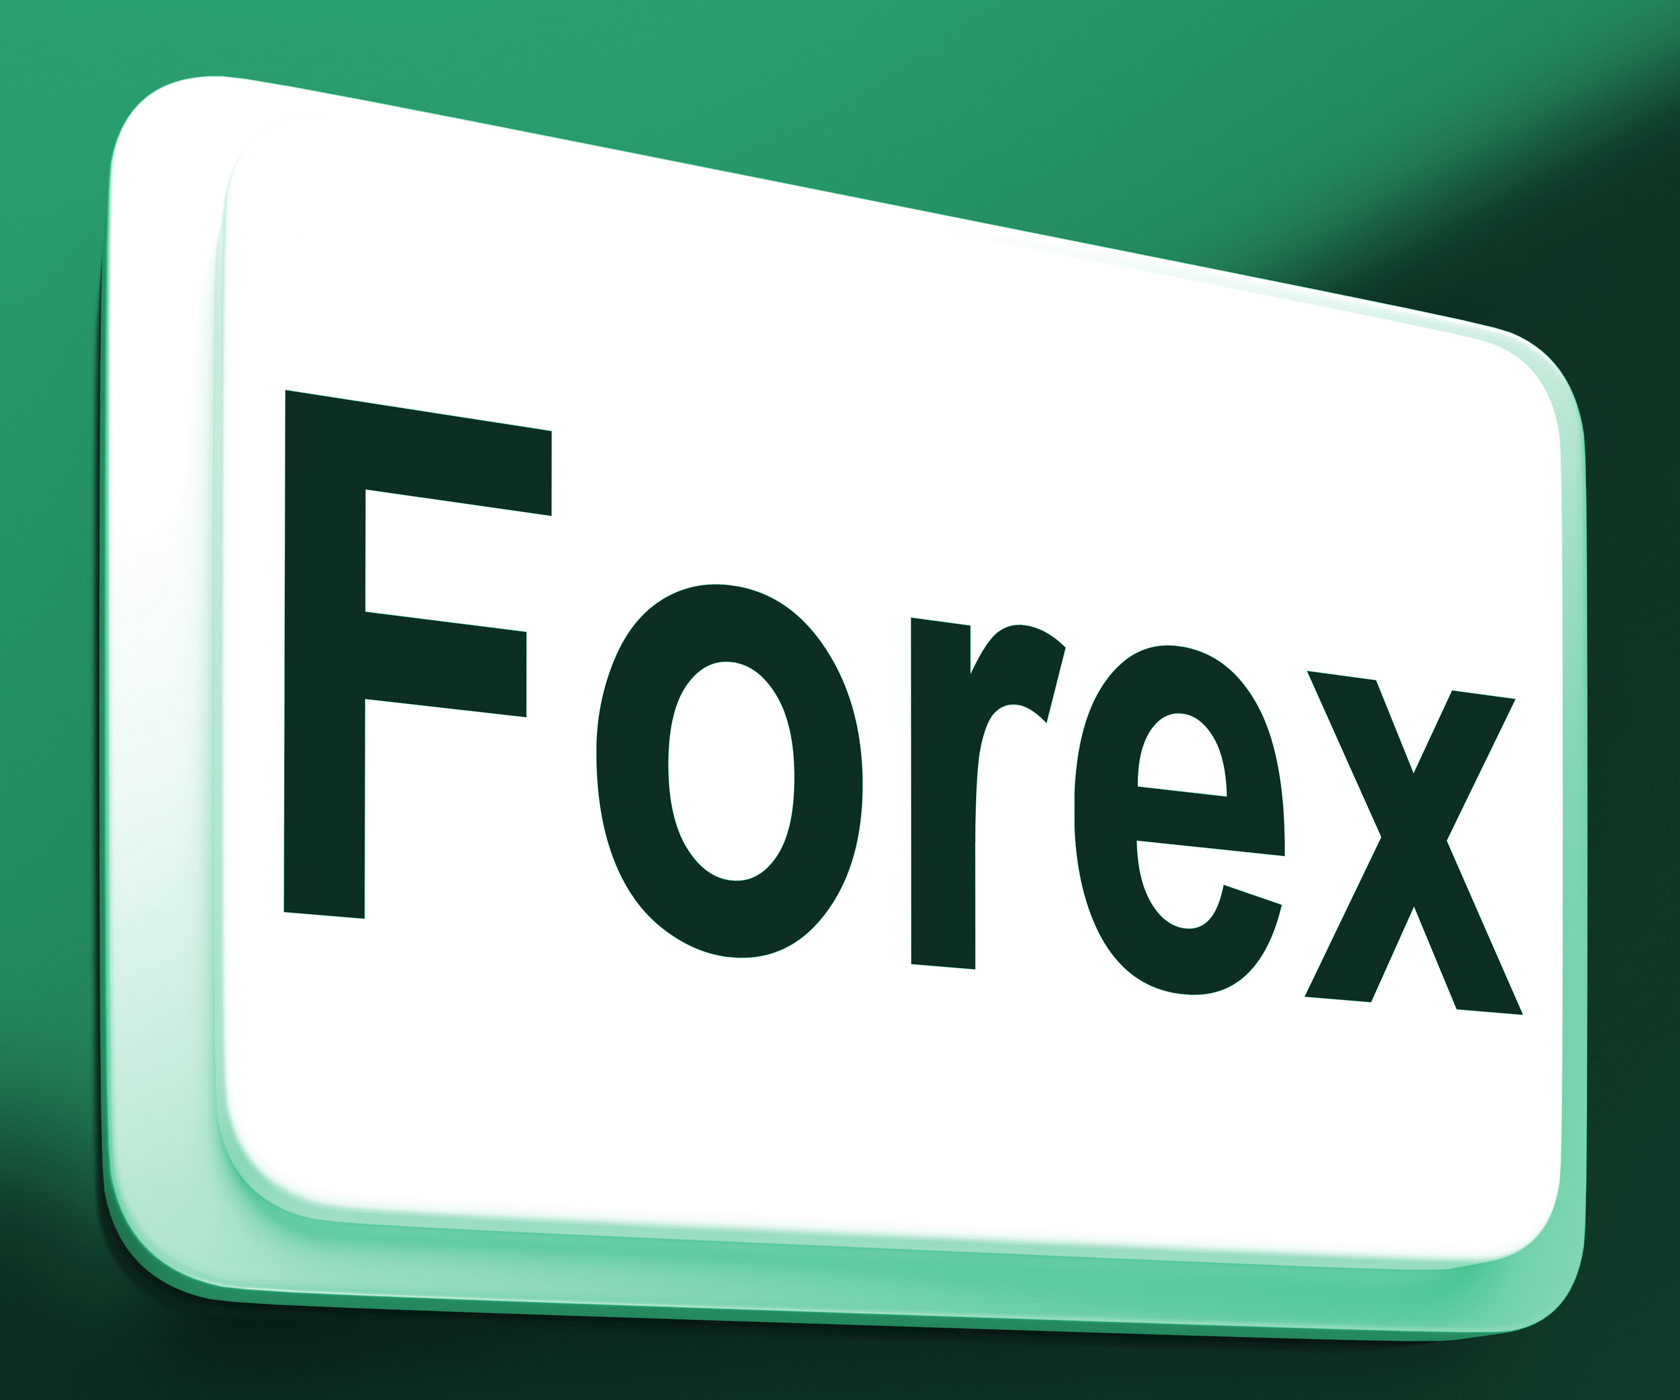 Forex button shows foreign exchange or currency photo